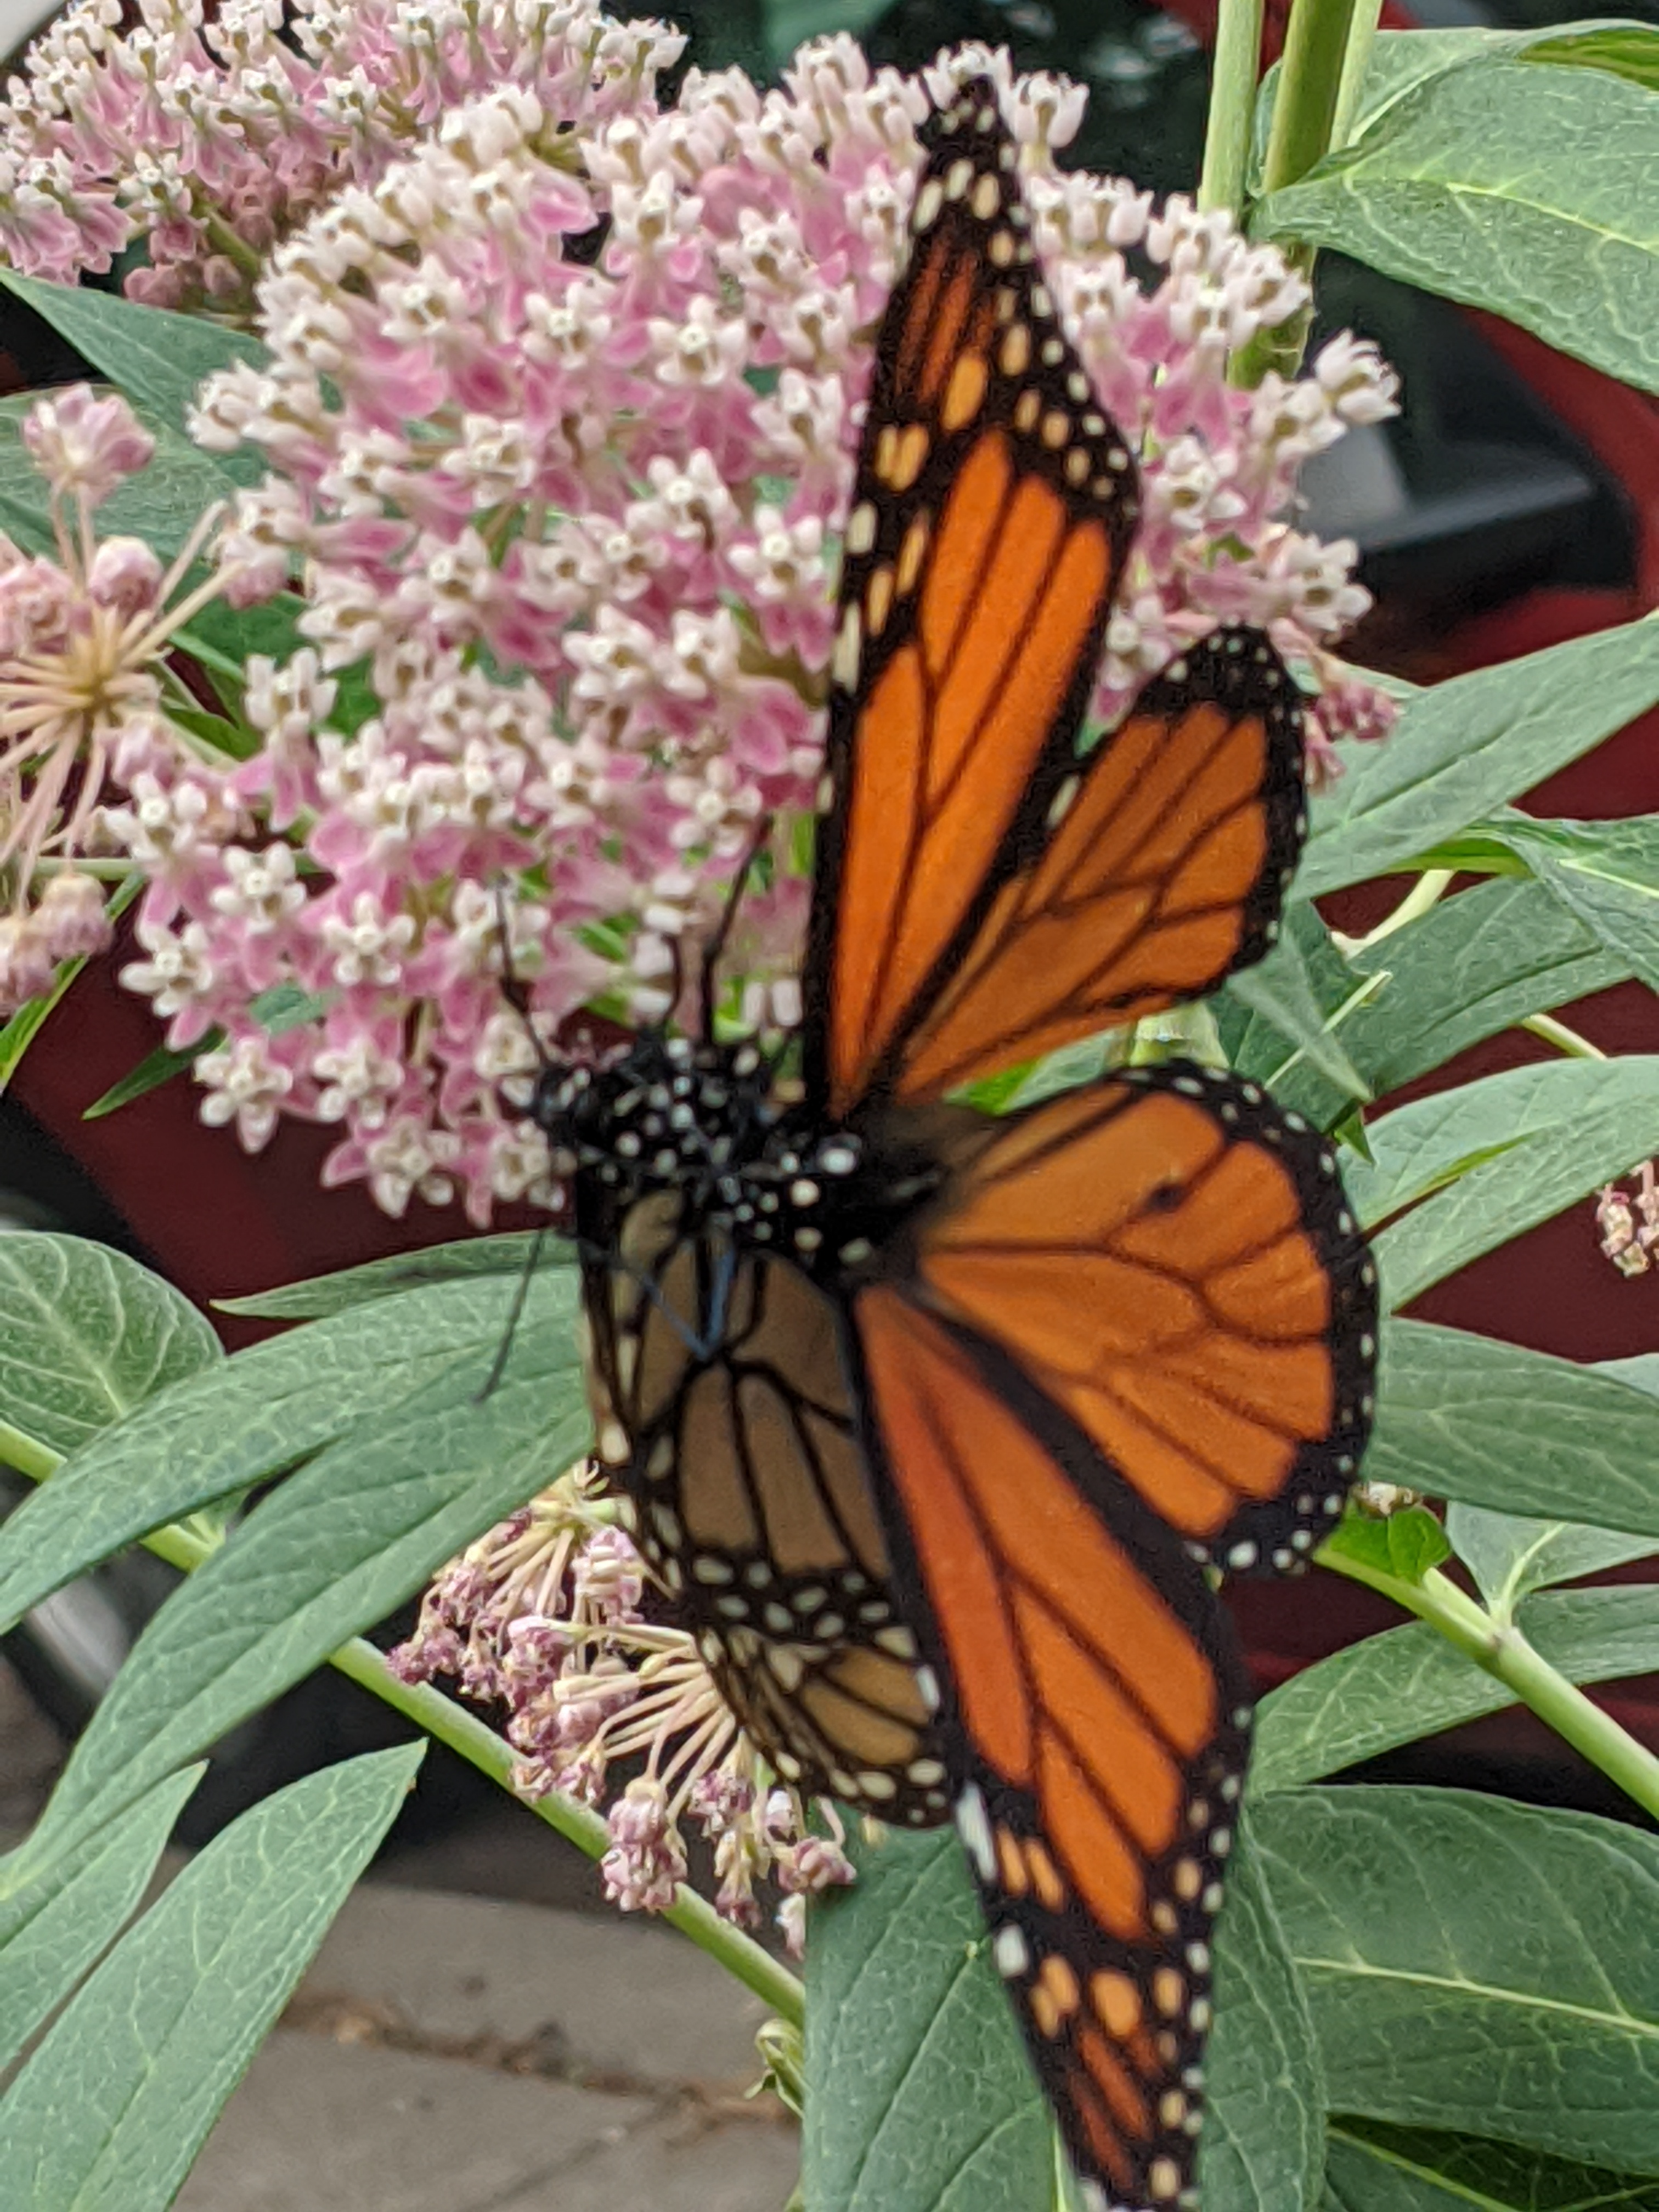 This is a picture showing a male and female monarch butterfly on pink swamp milkweed flower.